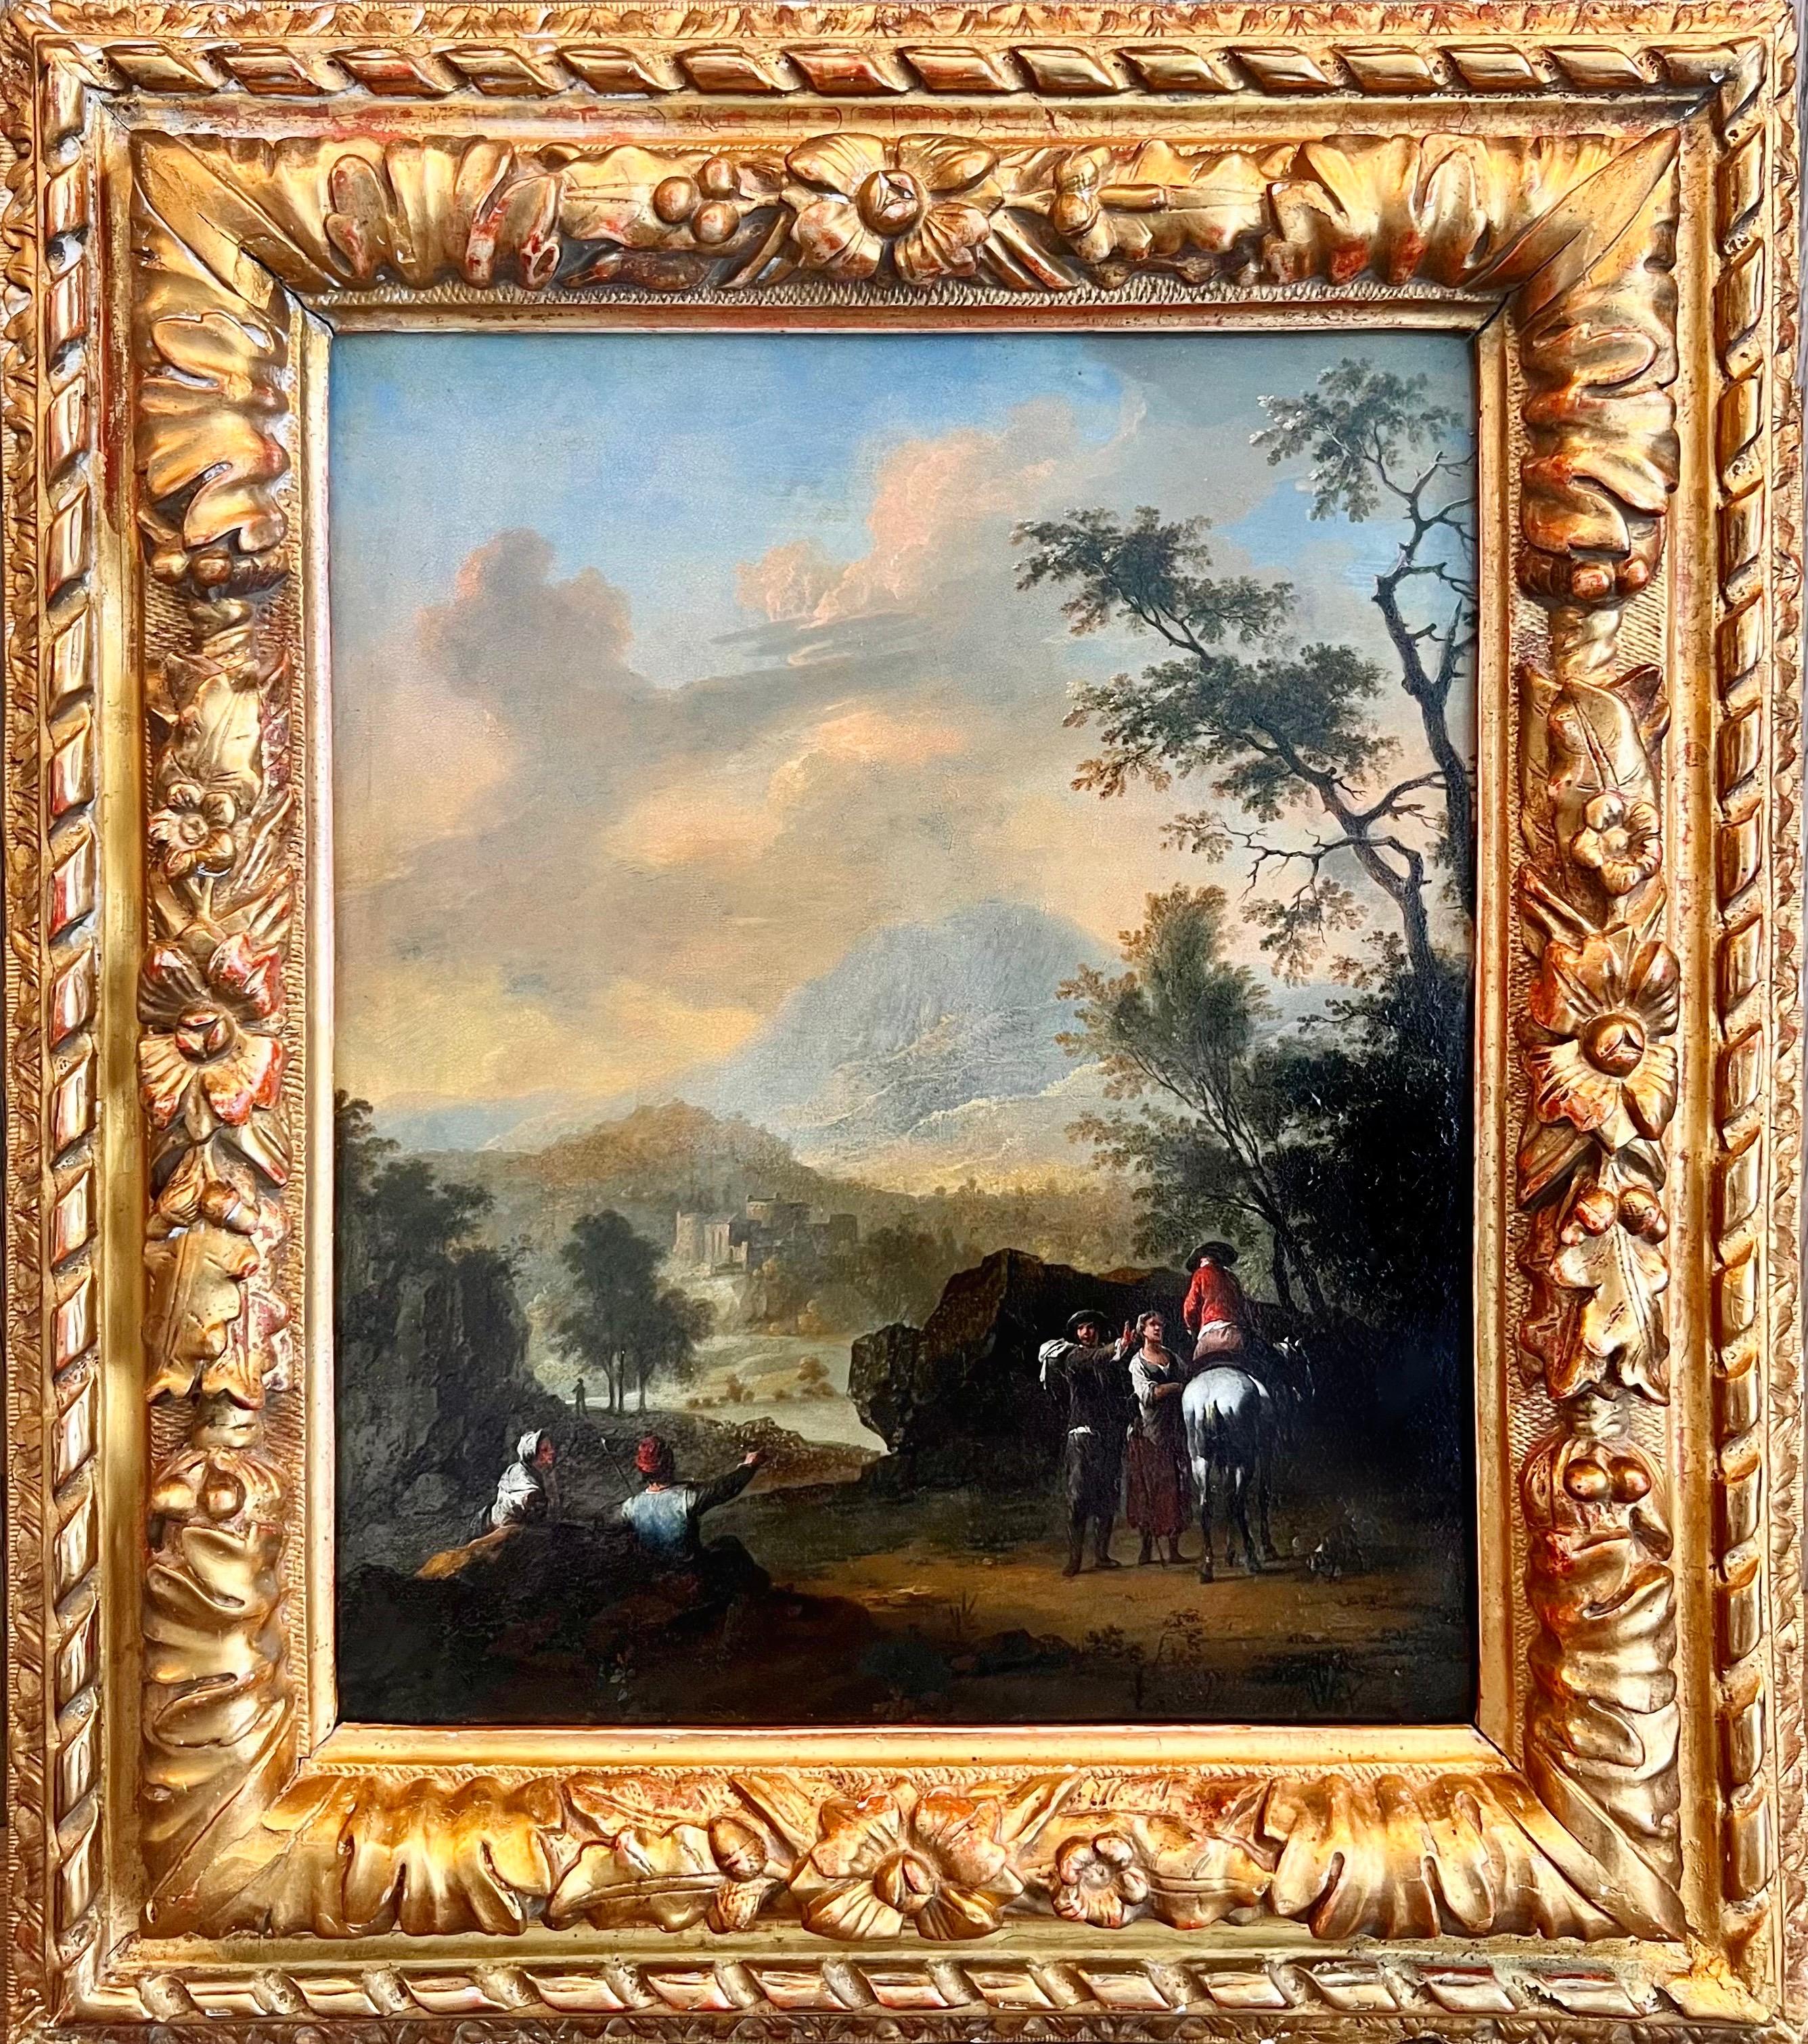 Franz Paula De Ferg Landscape Painting - 18th century Old Master oil painting - Travellers at rest in a sunset landscape 